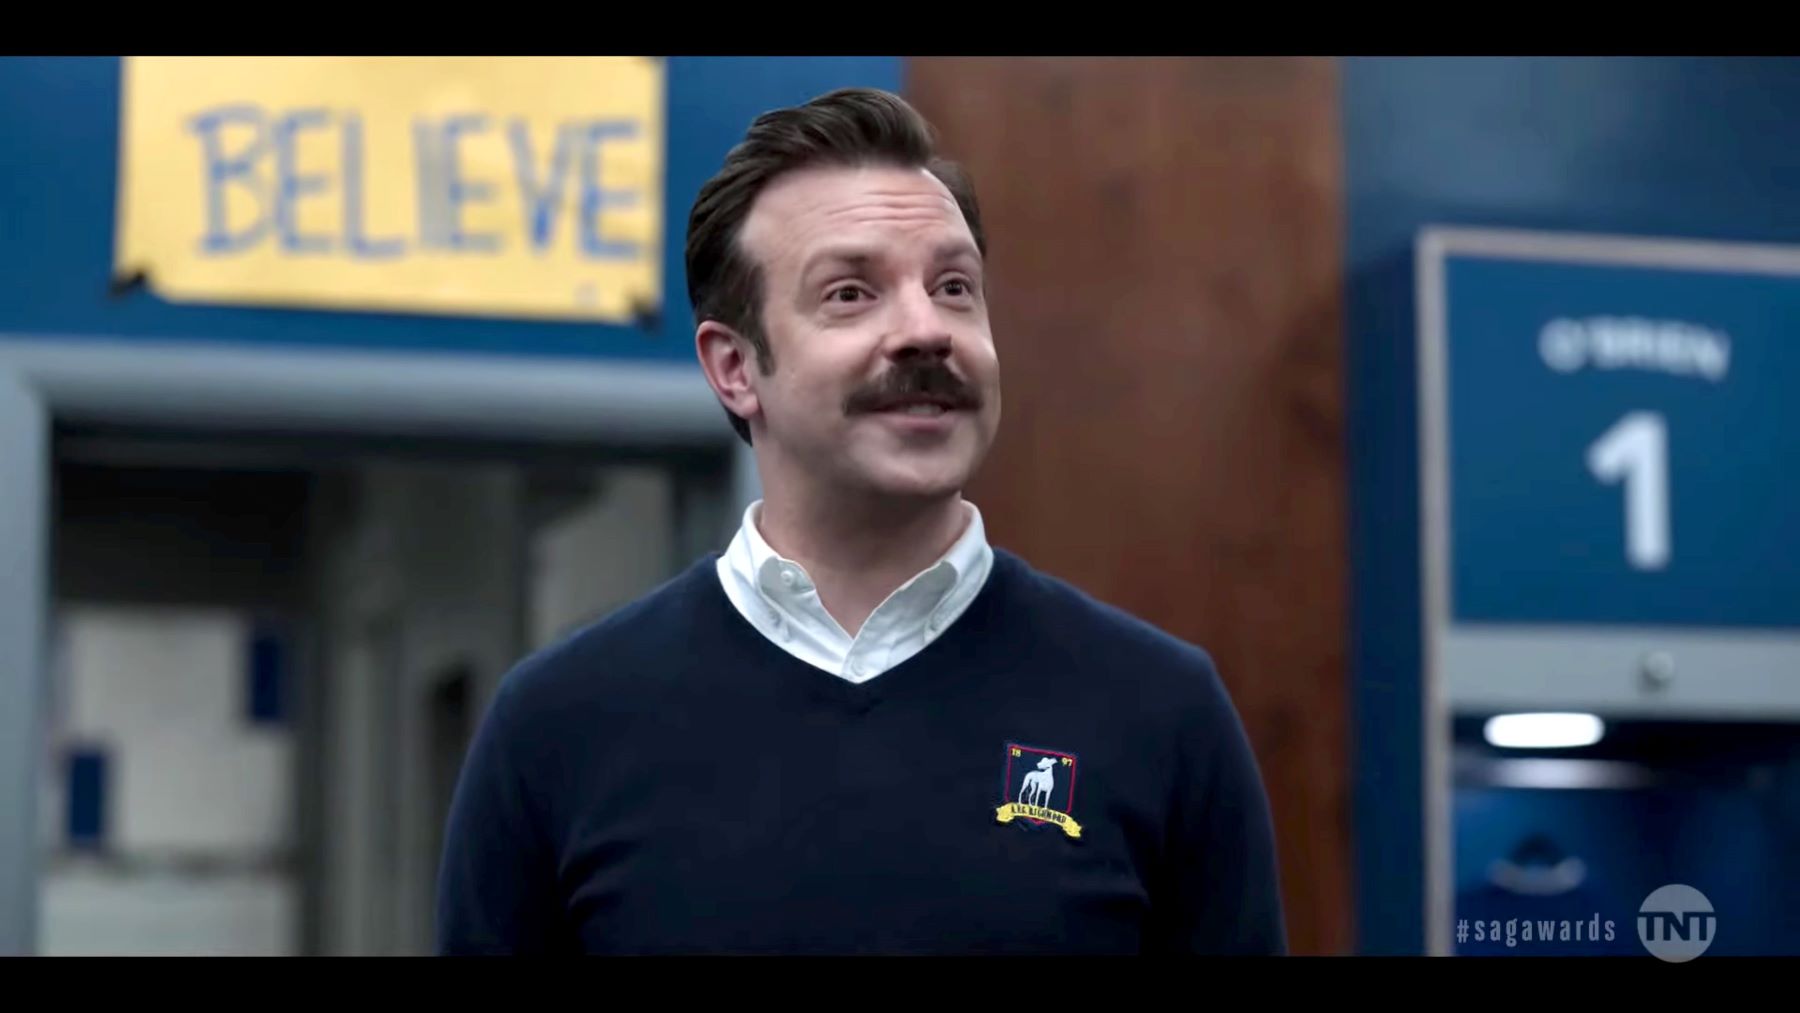 ‘Ted Lasso’: Jason Sudeikis Said 1 Unexpected Fan Reaction to the Show Is ‘Really Lovely’